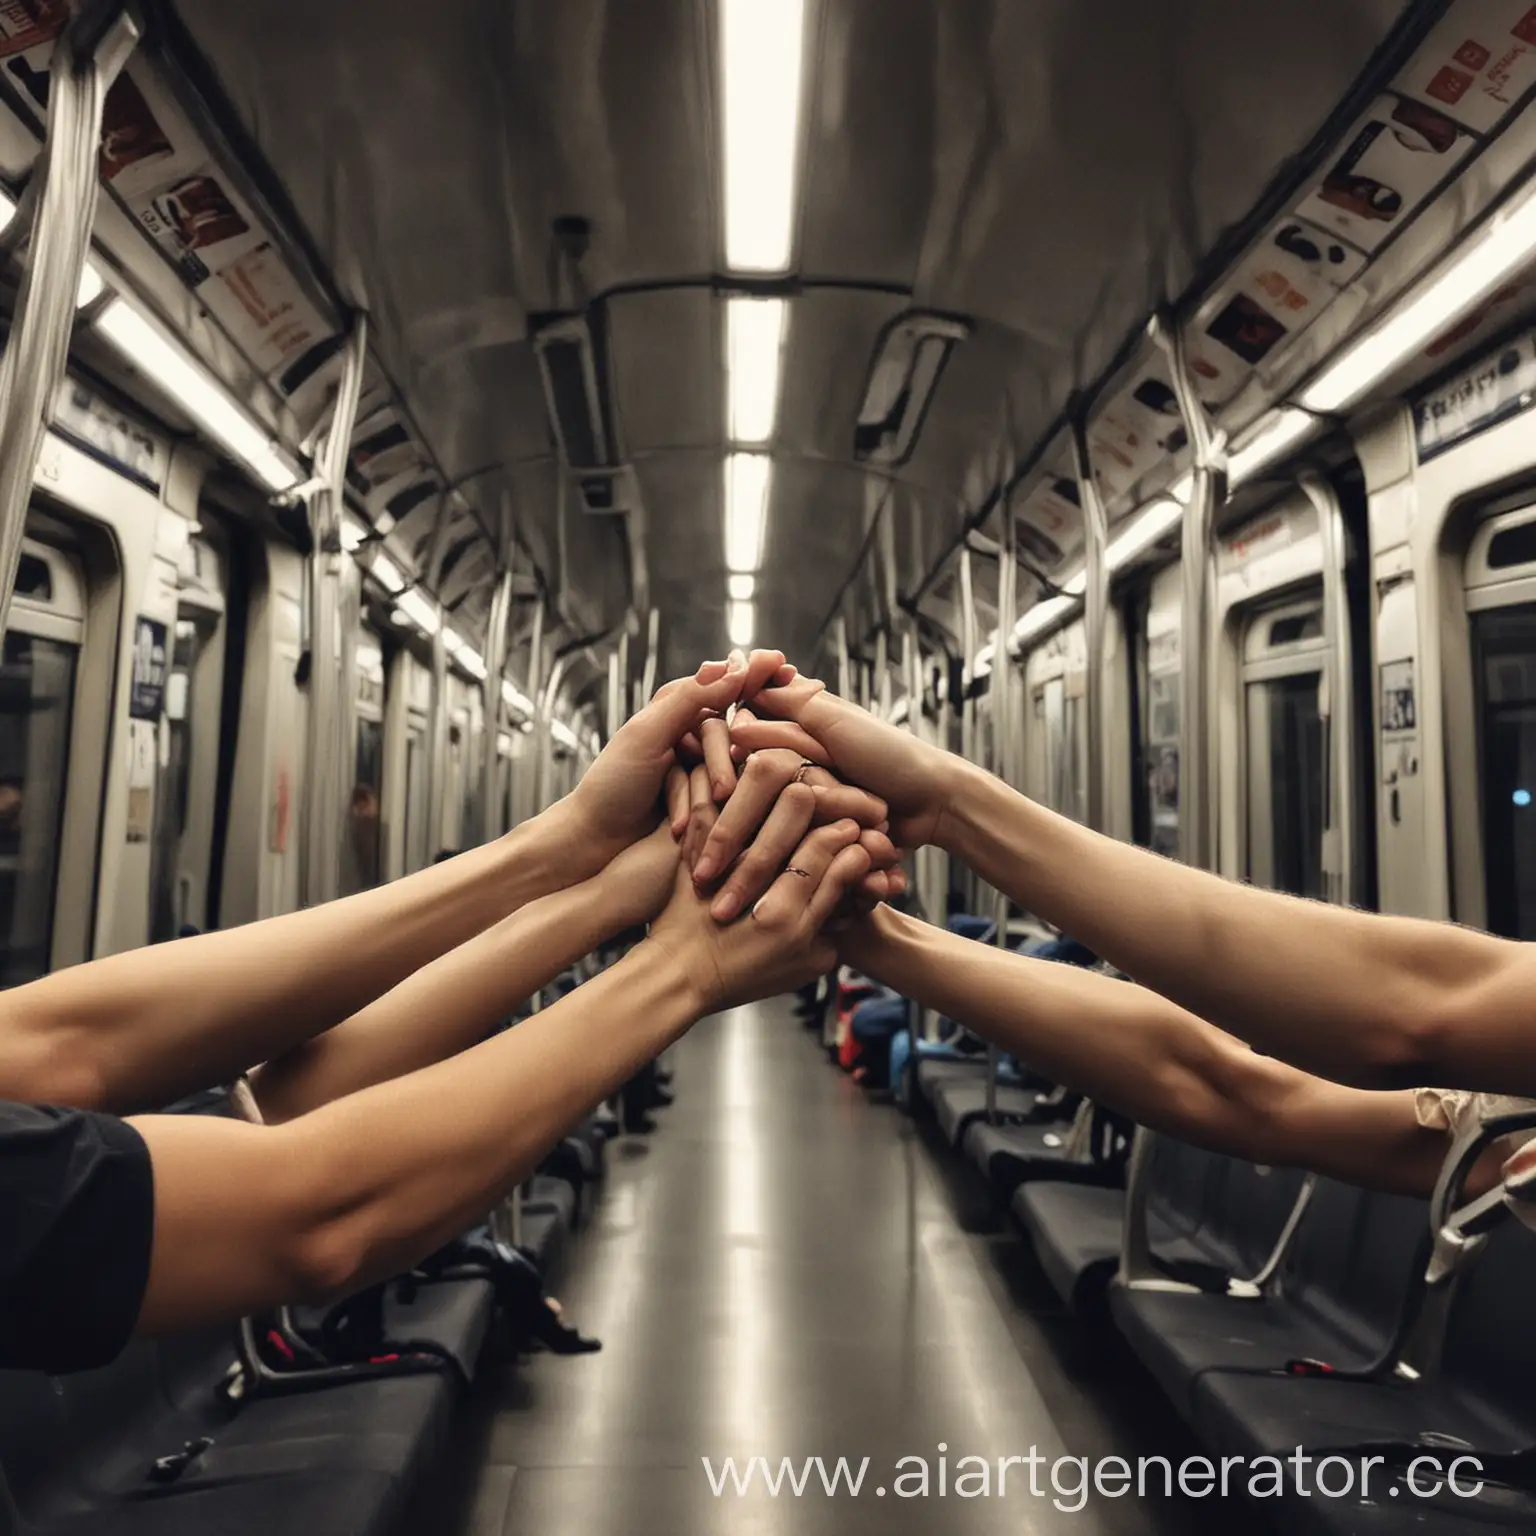 People-Commuting-on-Subway-Hands-Riding-the-Metro